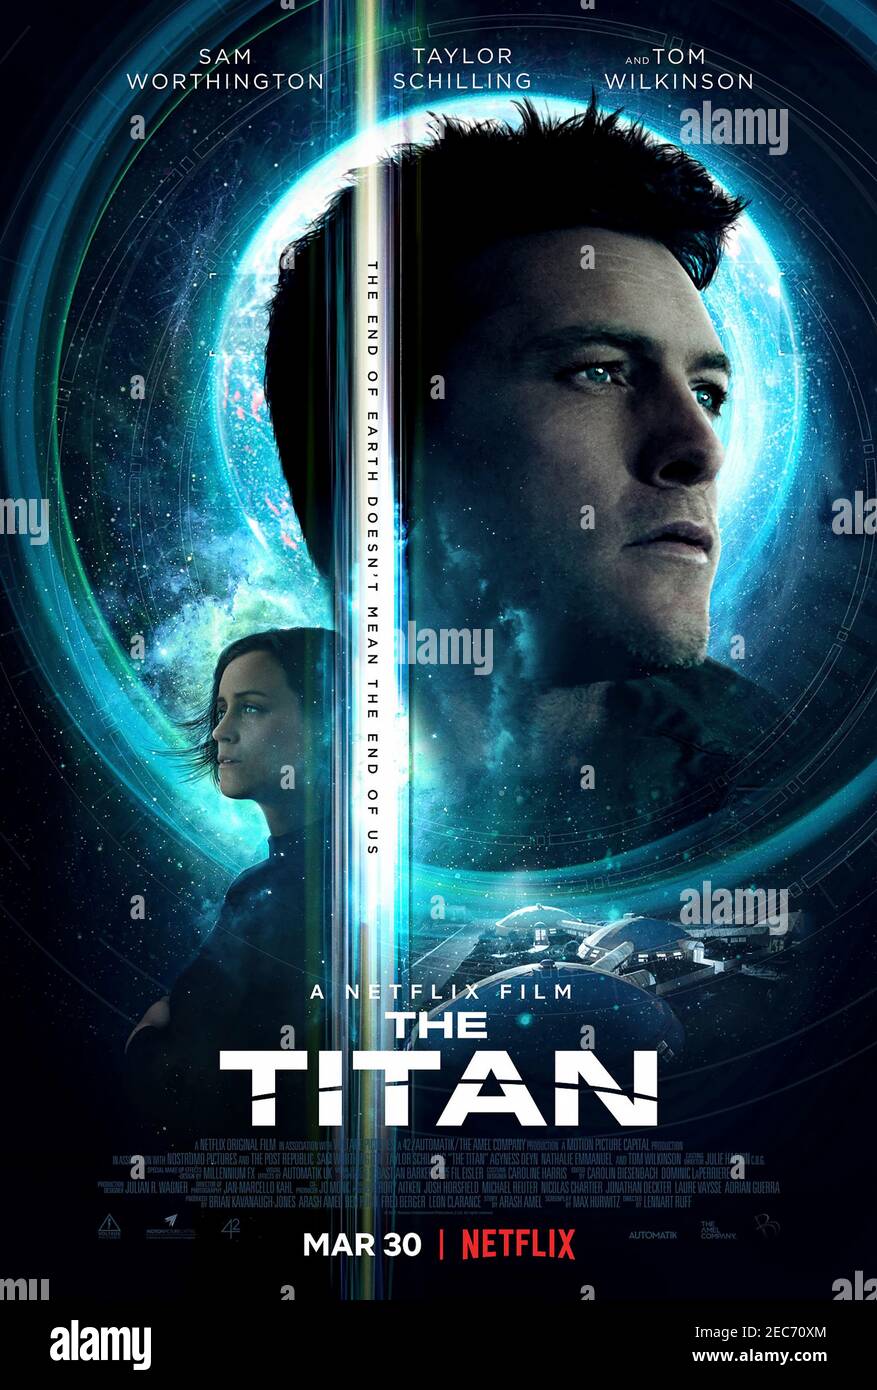 The Titan (2018) directed by Lennart Ruff and starring Sam Worthington, Taylor Schilling and Tom Wilkinson. A military family takes part in a ground-breaking experiment of genetic evolution and space exploration. Stock Photo